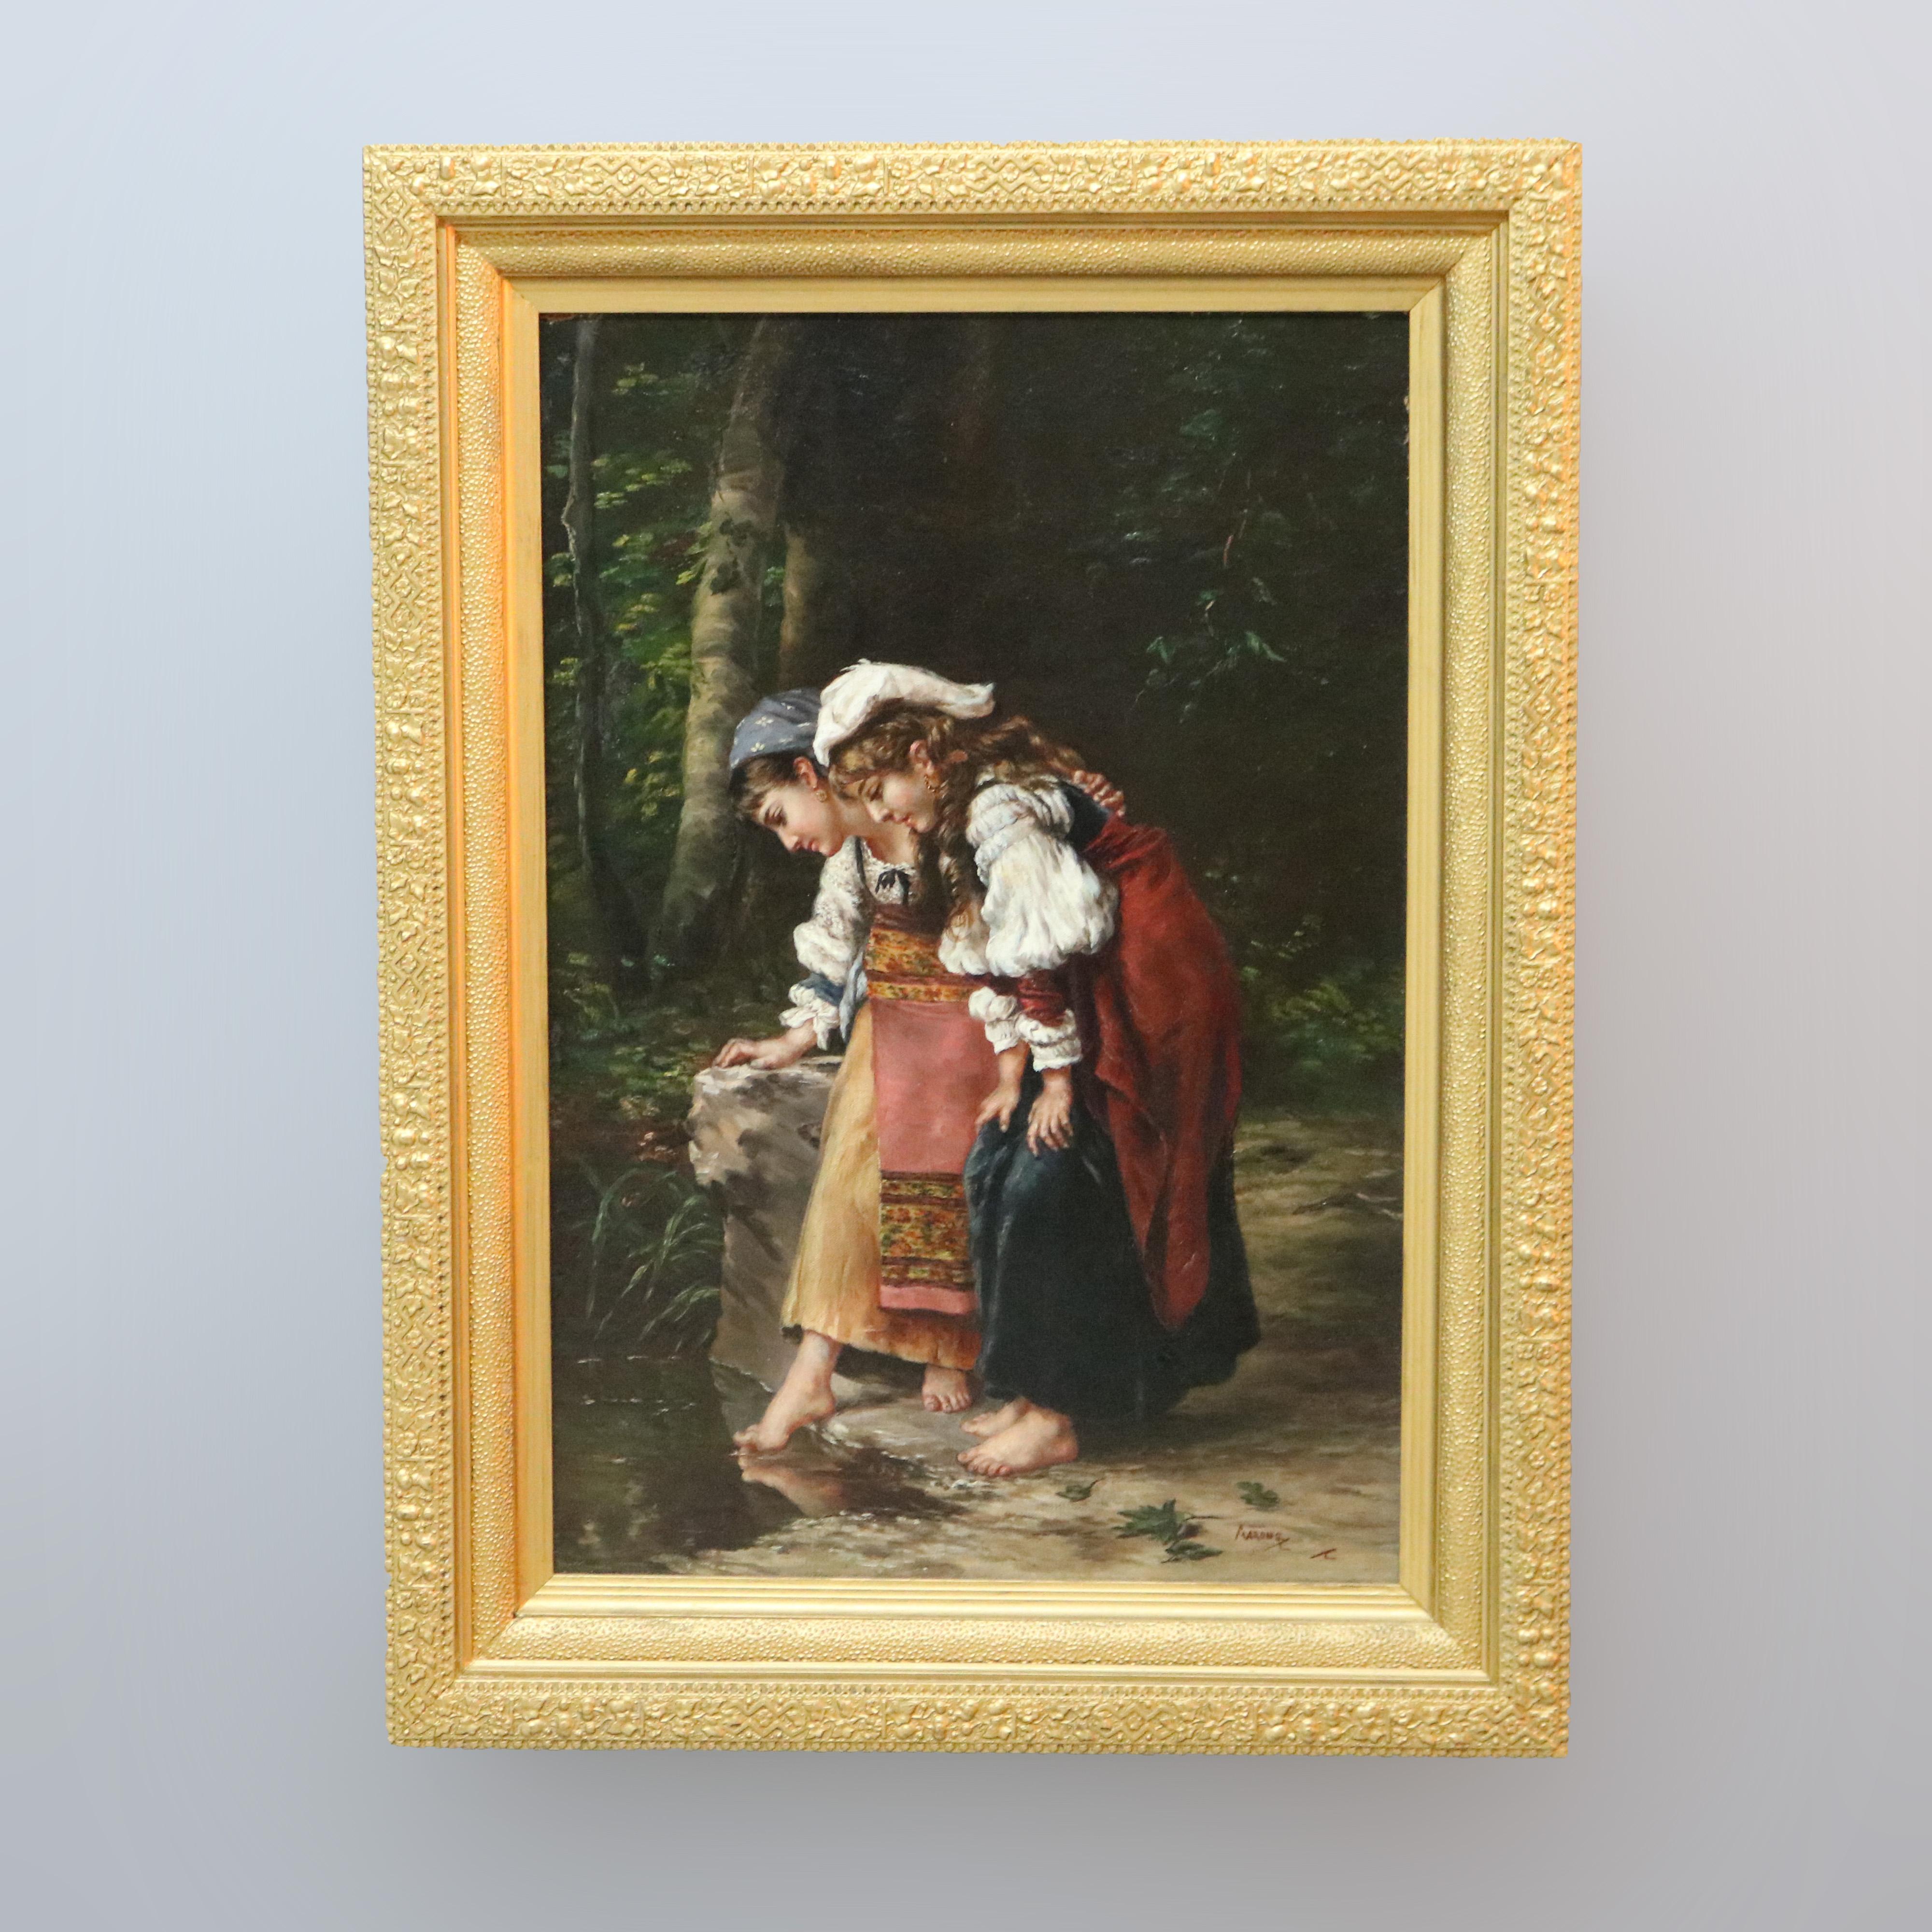 European Antique Oil Painting by Aarons, Genre Scene with Two Young Girls, Circa 1890